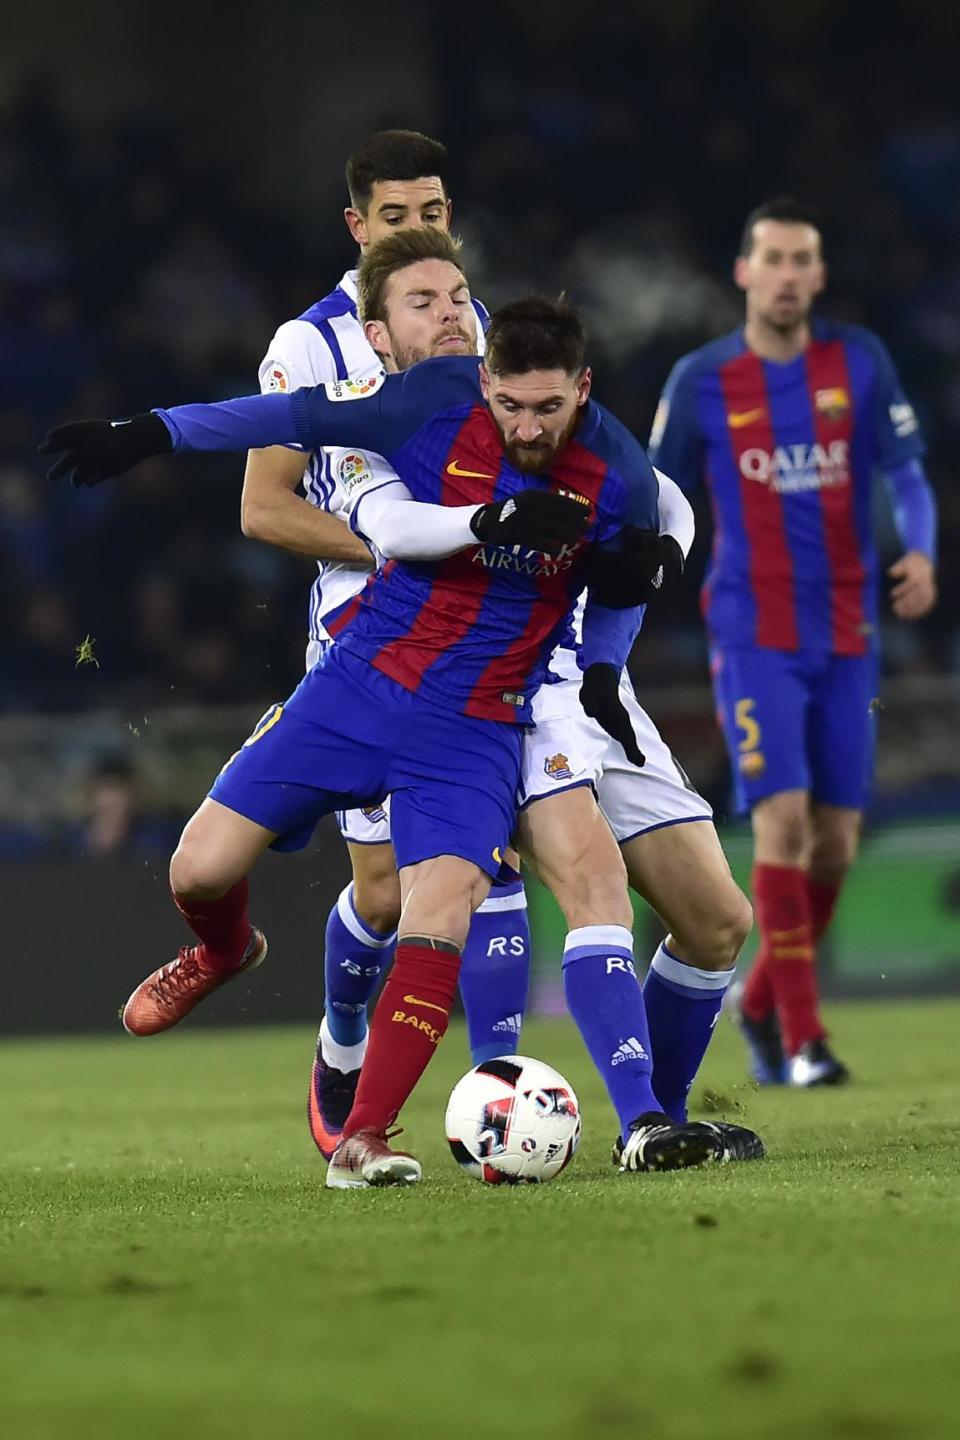 FC Barcelona's Lionel Messi, duels for the ball with Real Sociedad's Aritz Elustondo during the Spanish Copa del Rey, quarter final, first leg soccer match, between FC Barcelona and Real Sociedad, at Anoeta stadium, in San Sebastian, northern Spain, Thursday, Jan.19, 2017. (AP Photo/Alvaro Barrientos)